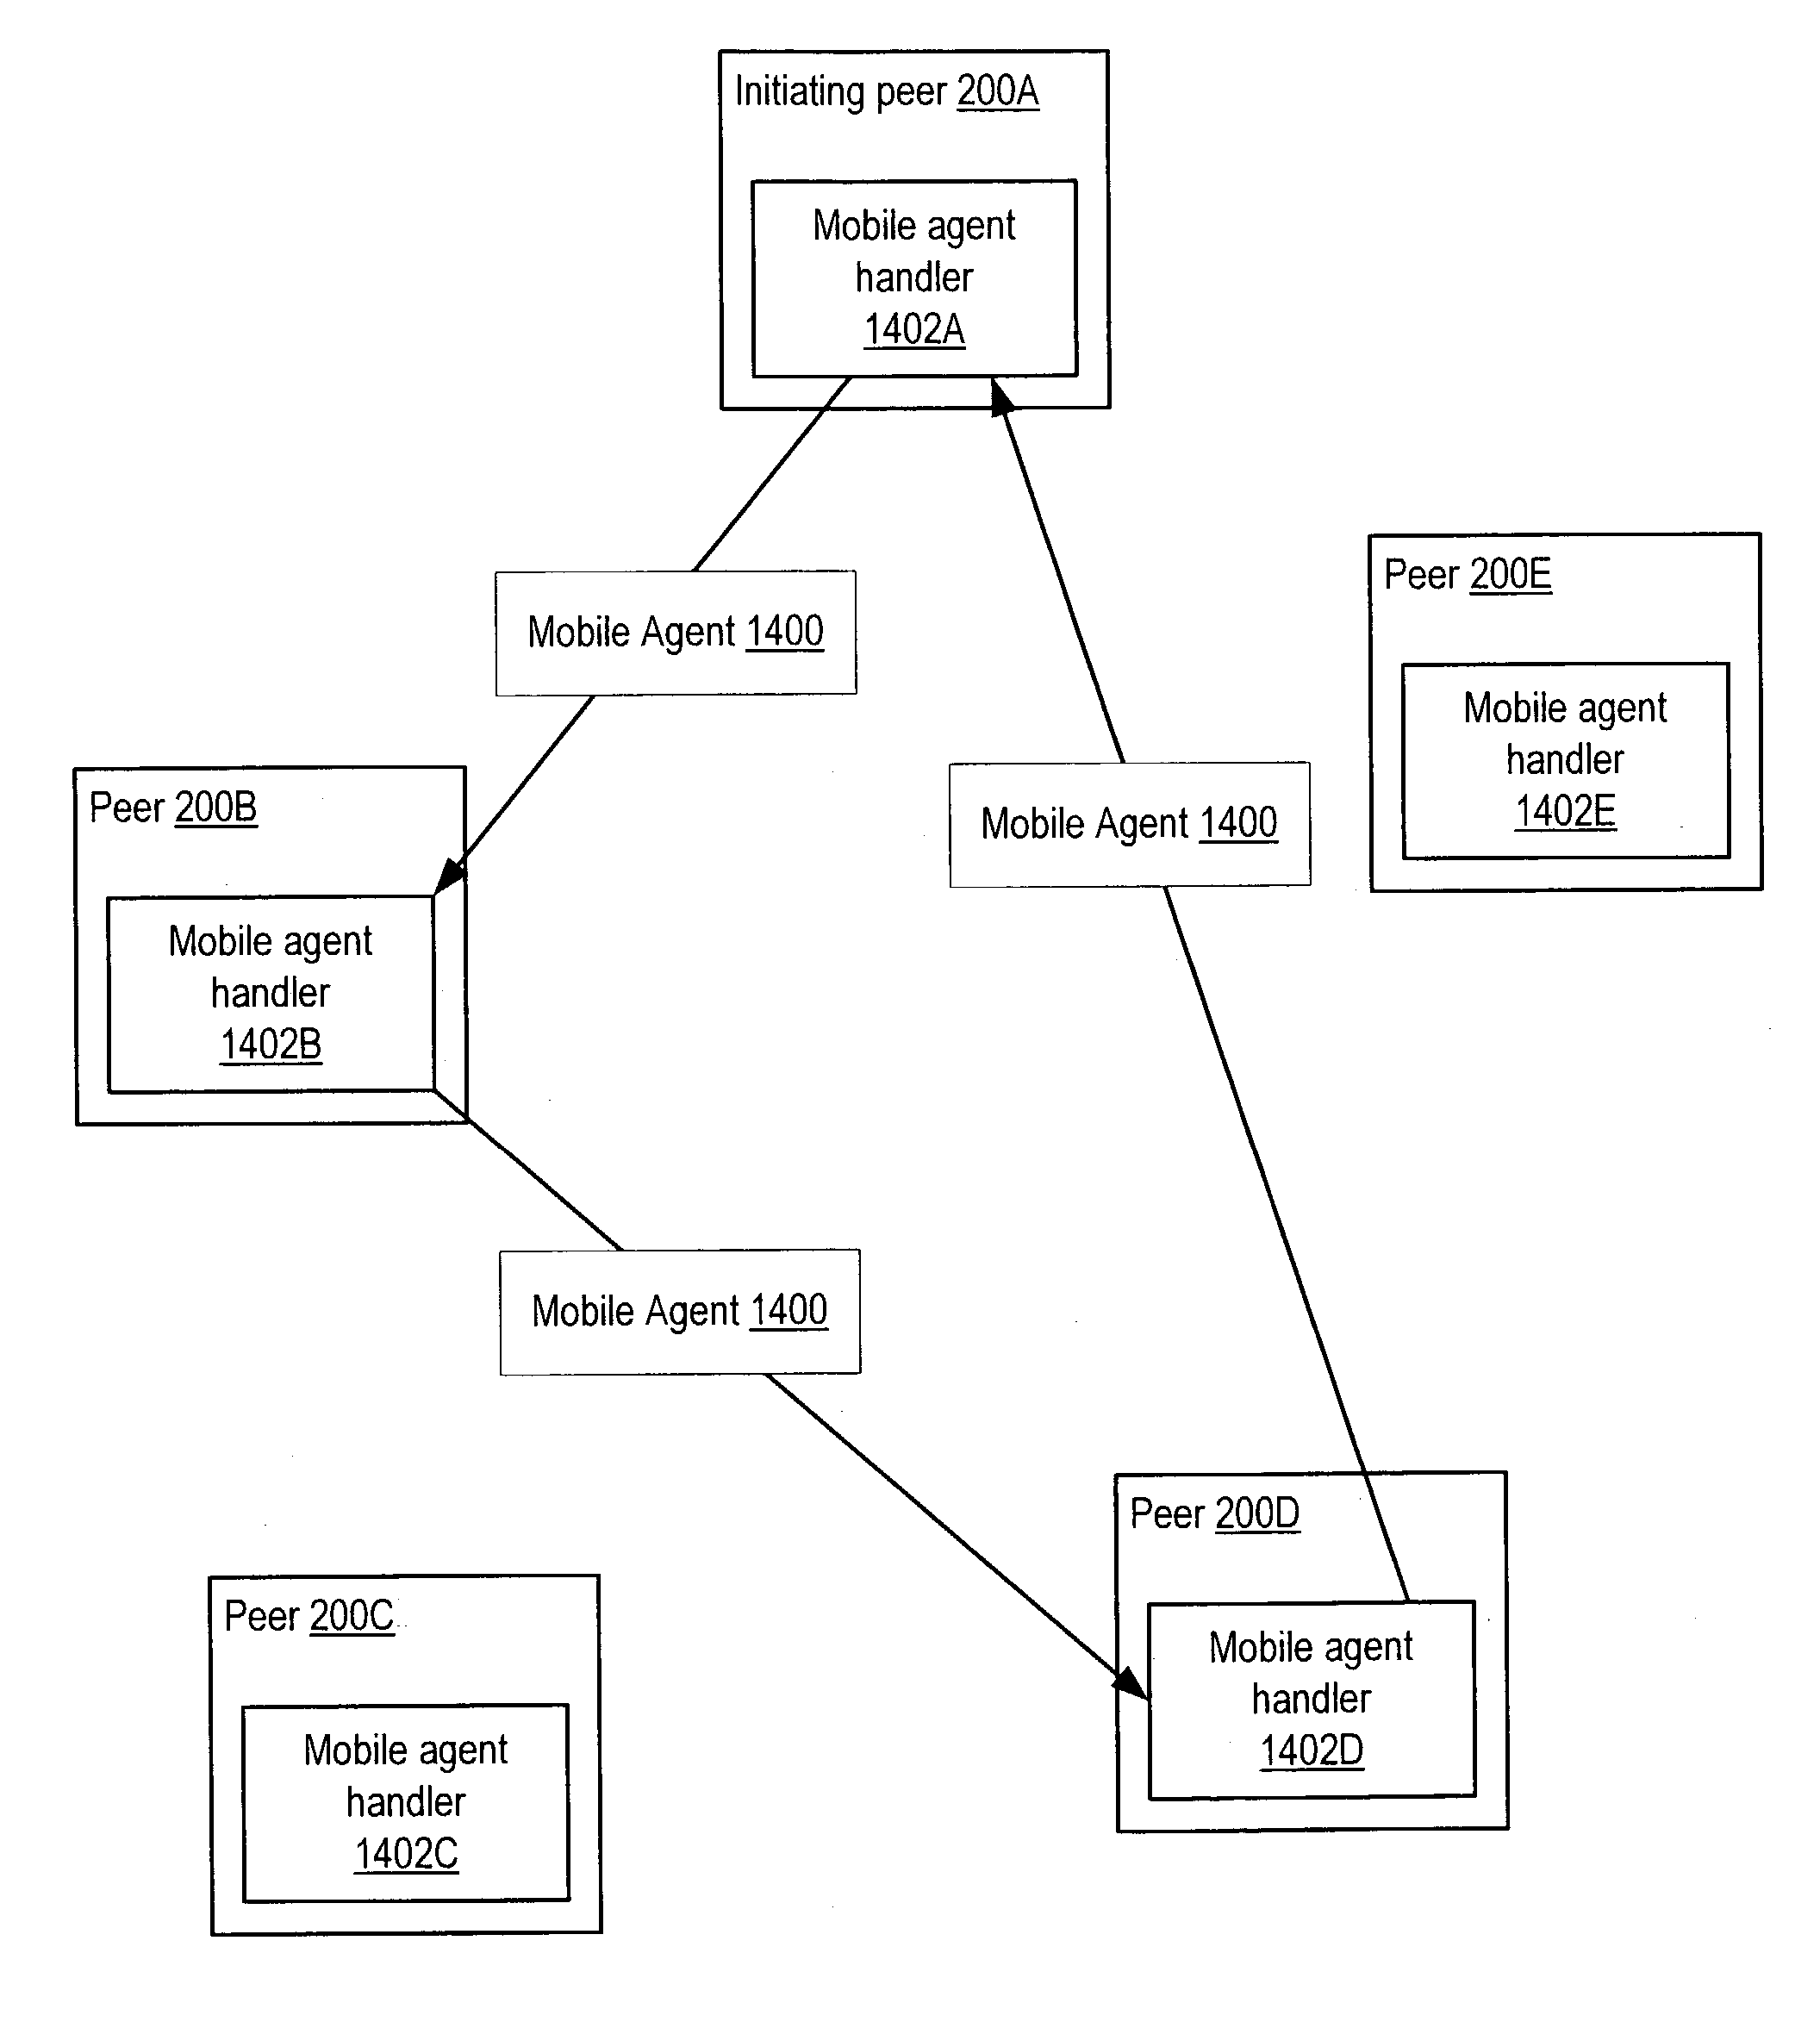 Managing distribution of content using mobile agents in peer-topeer networks